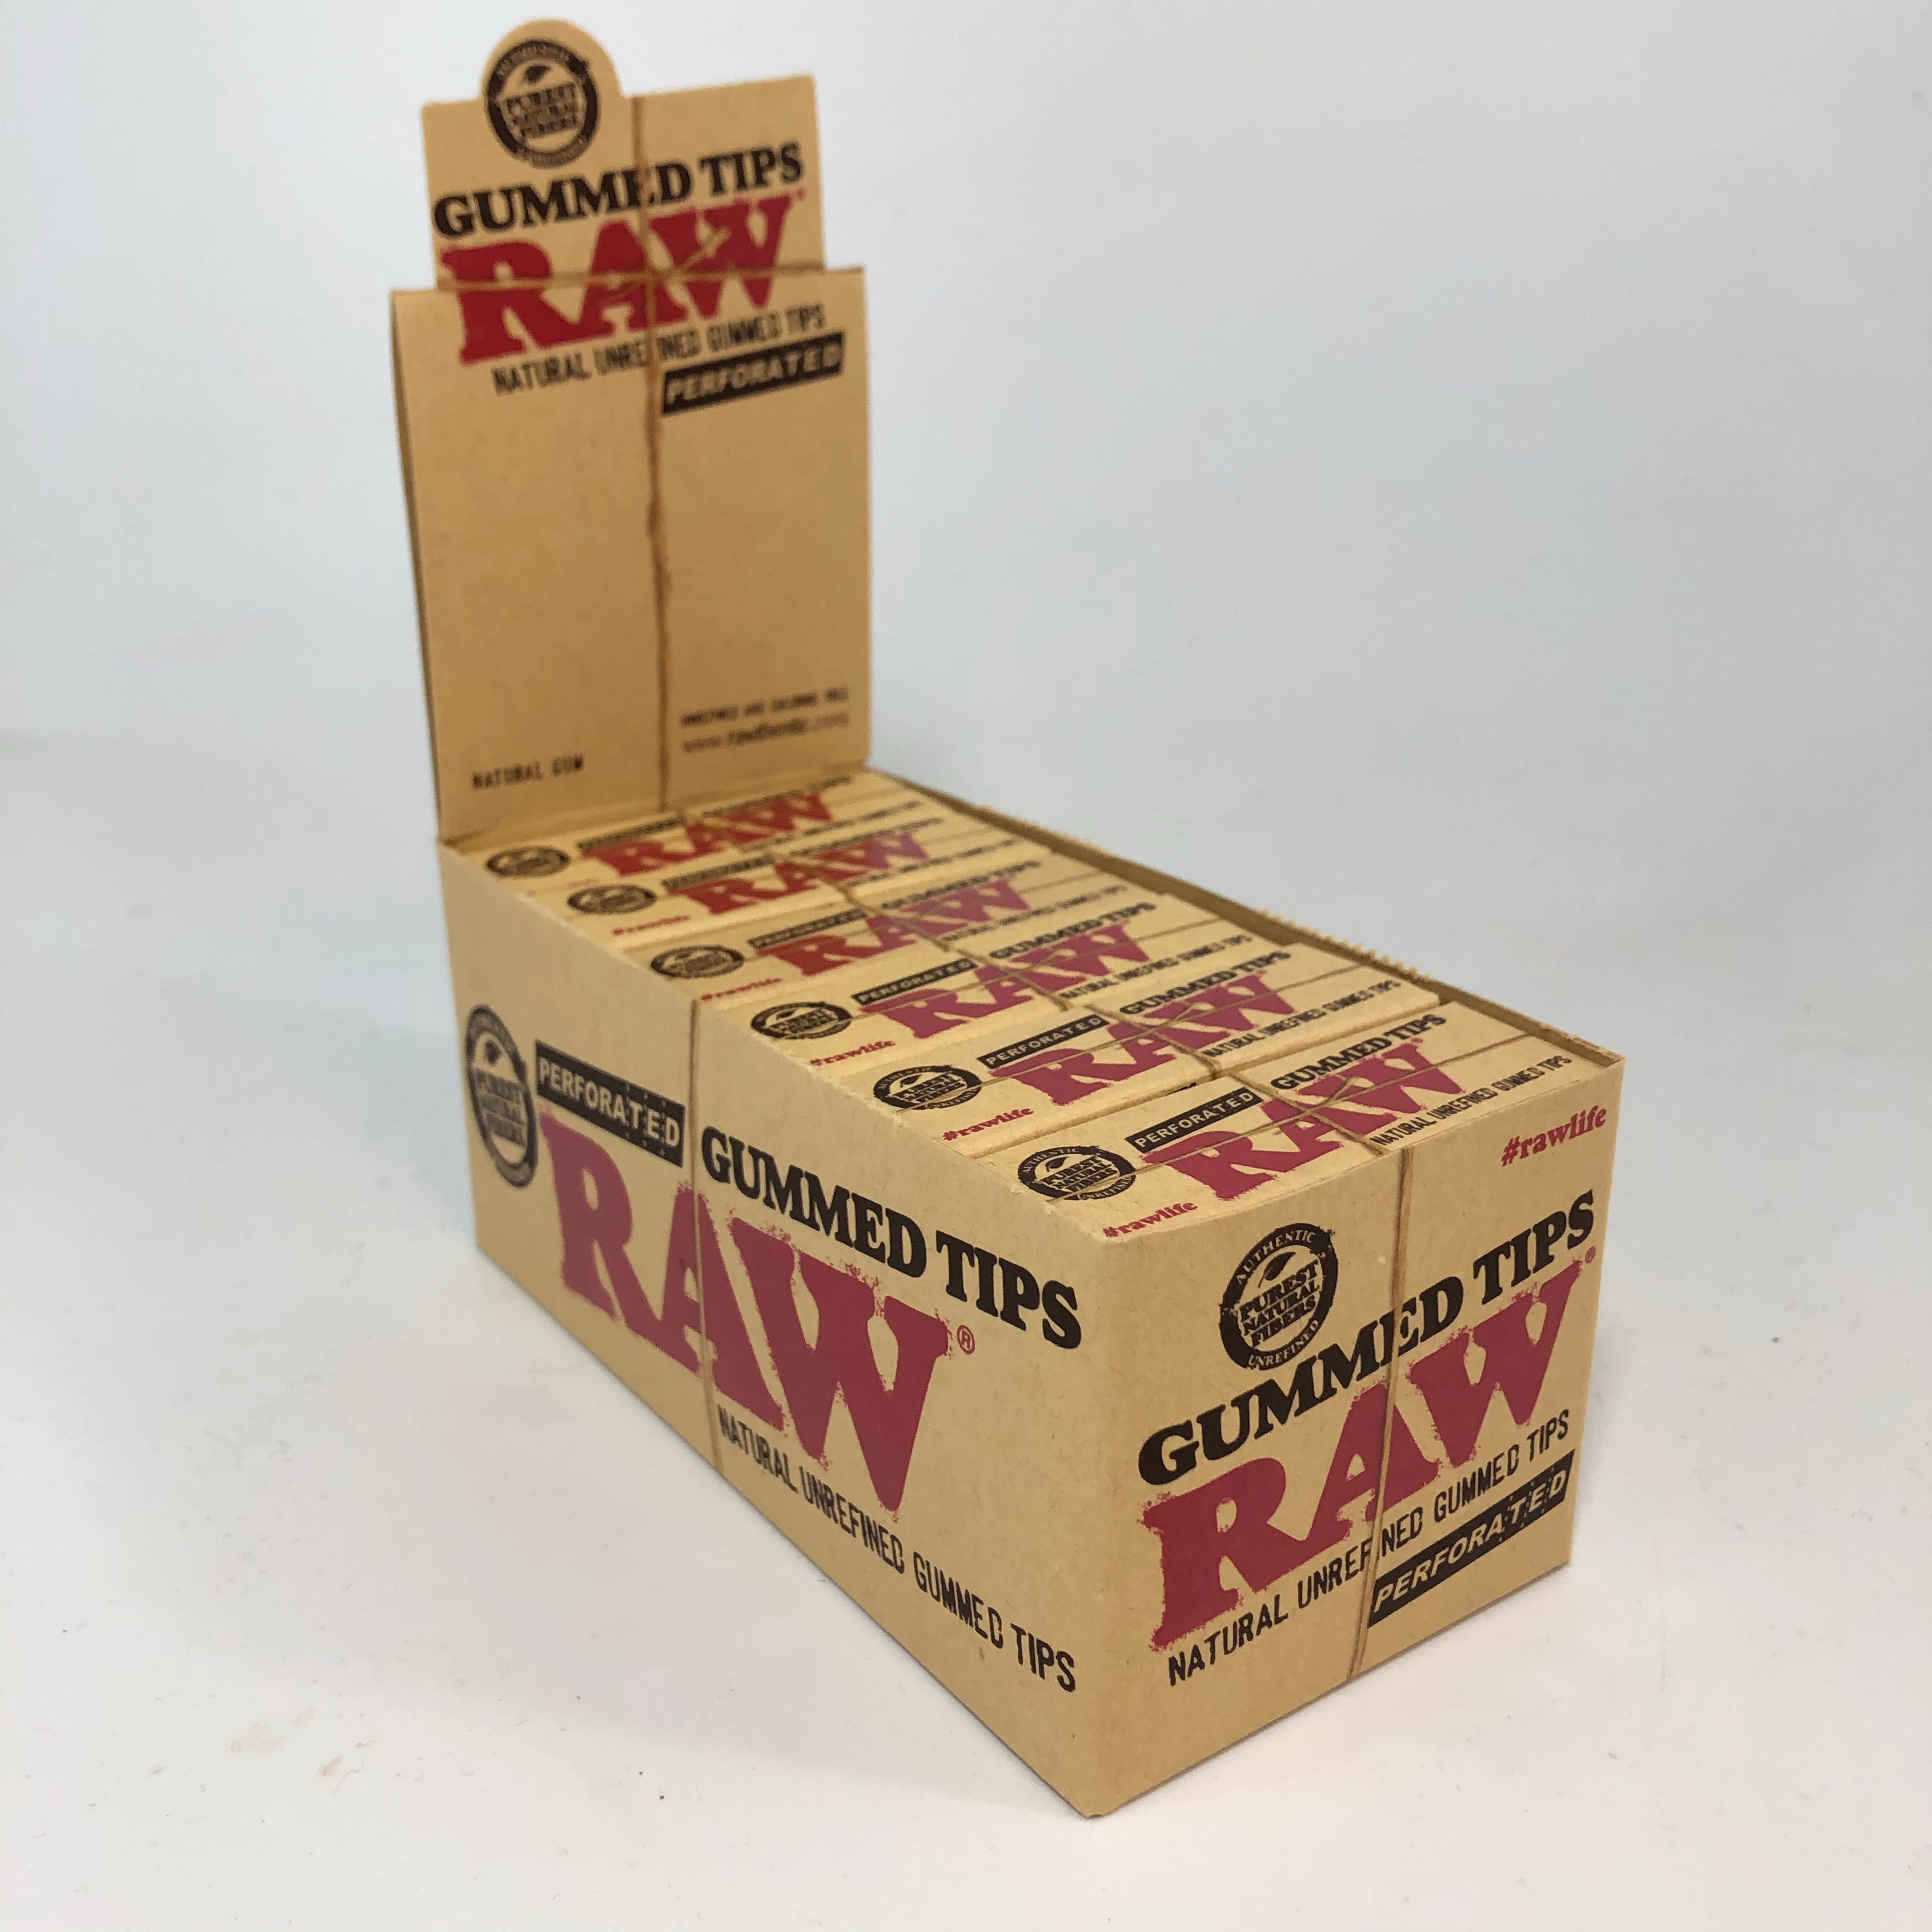 Raw Tips Gummed & Perforated -Single pack